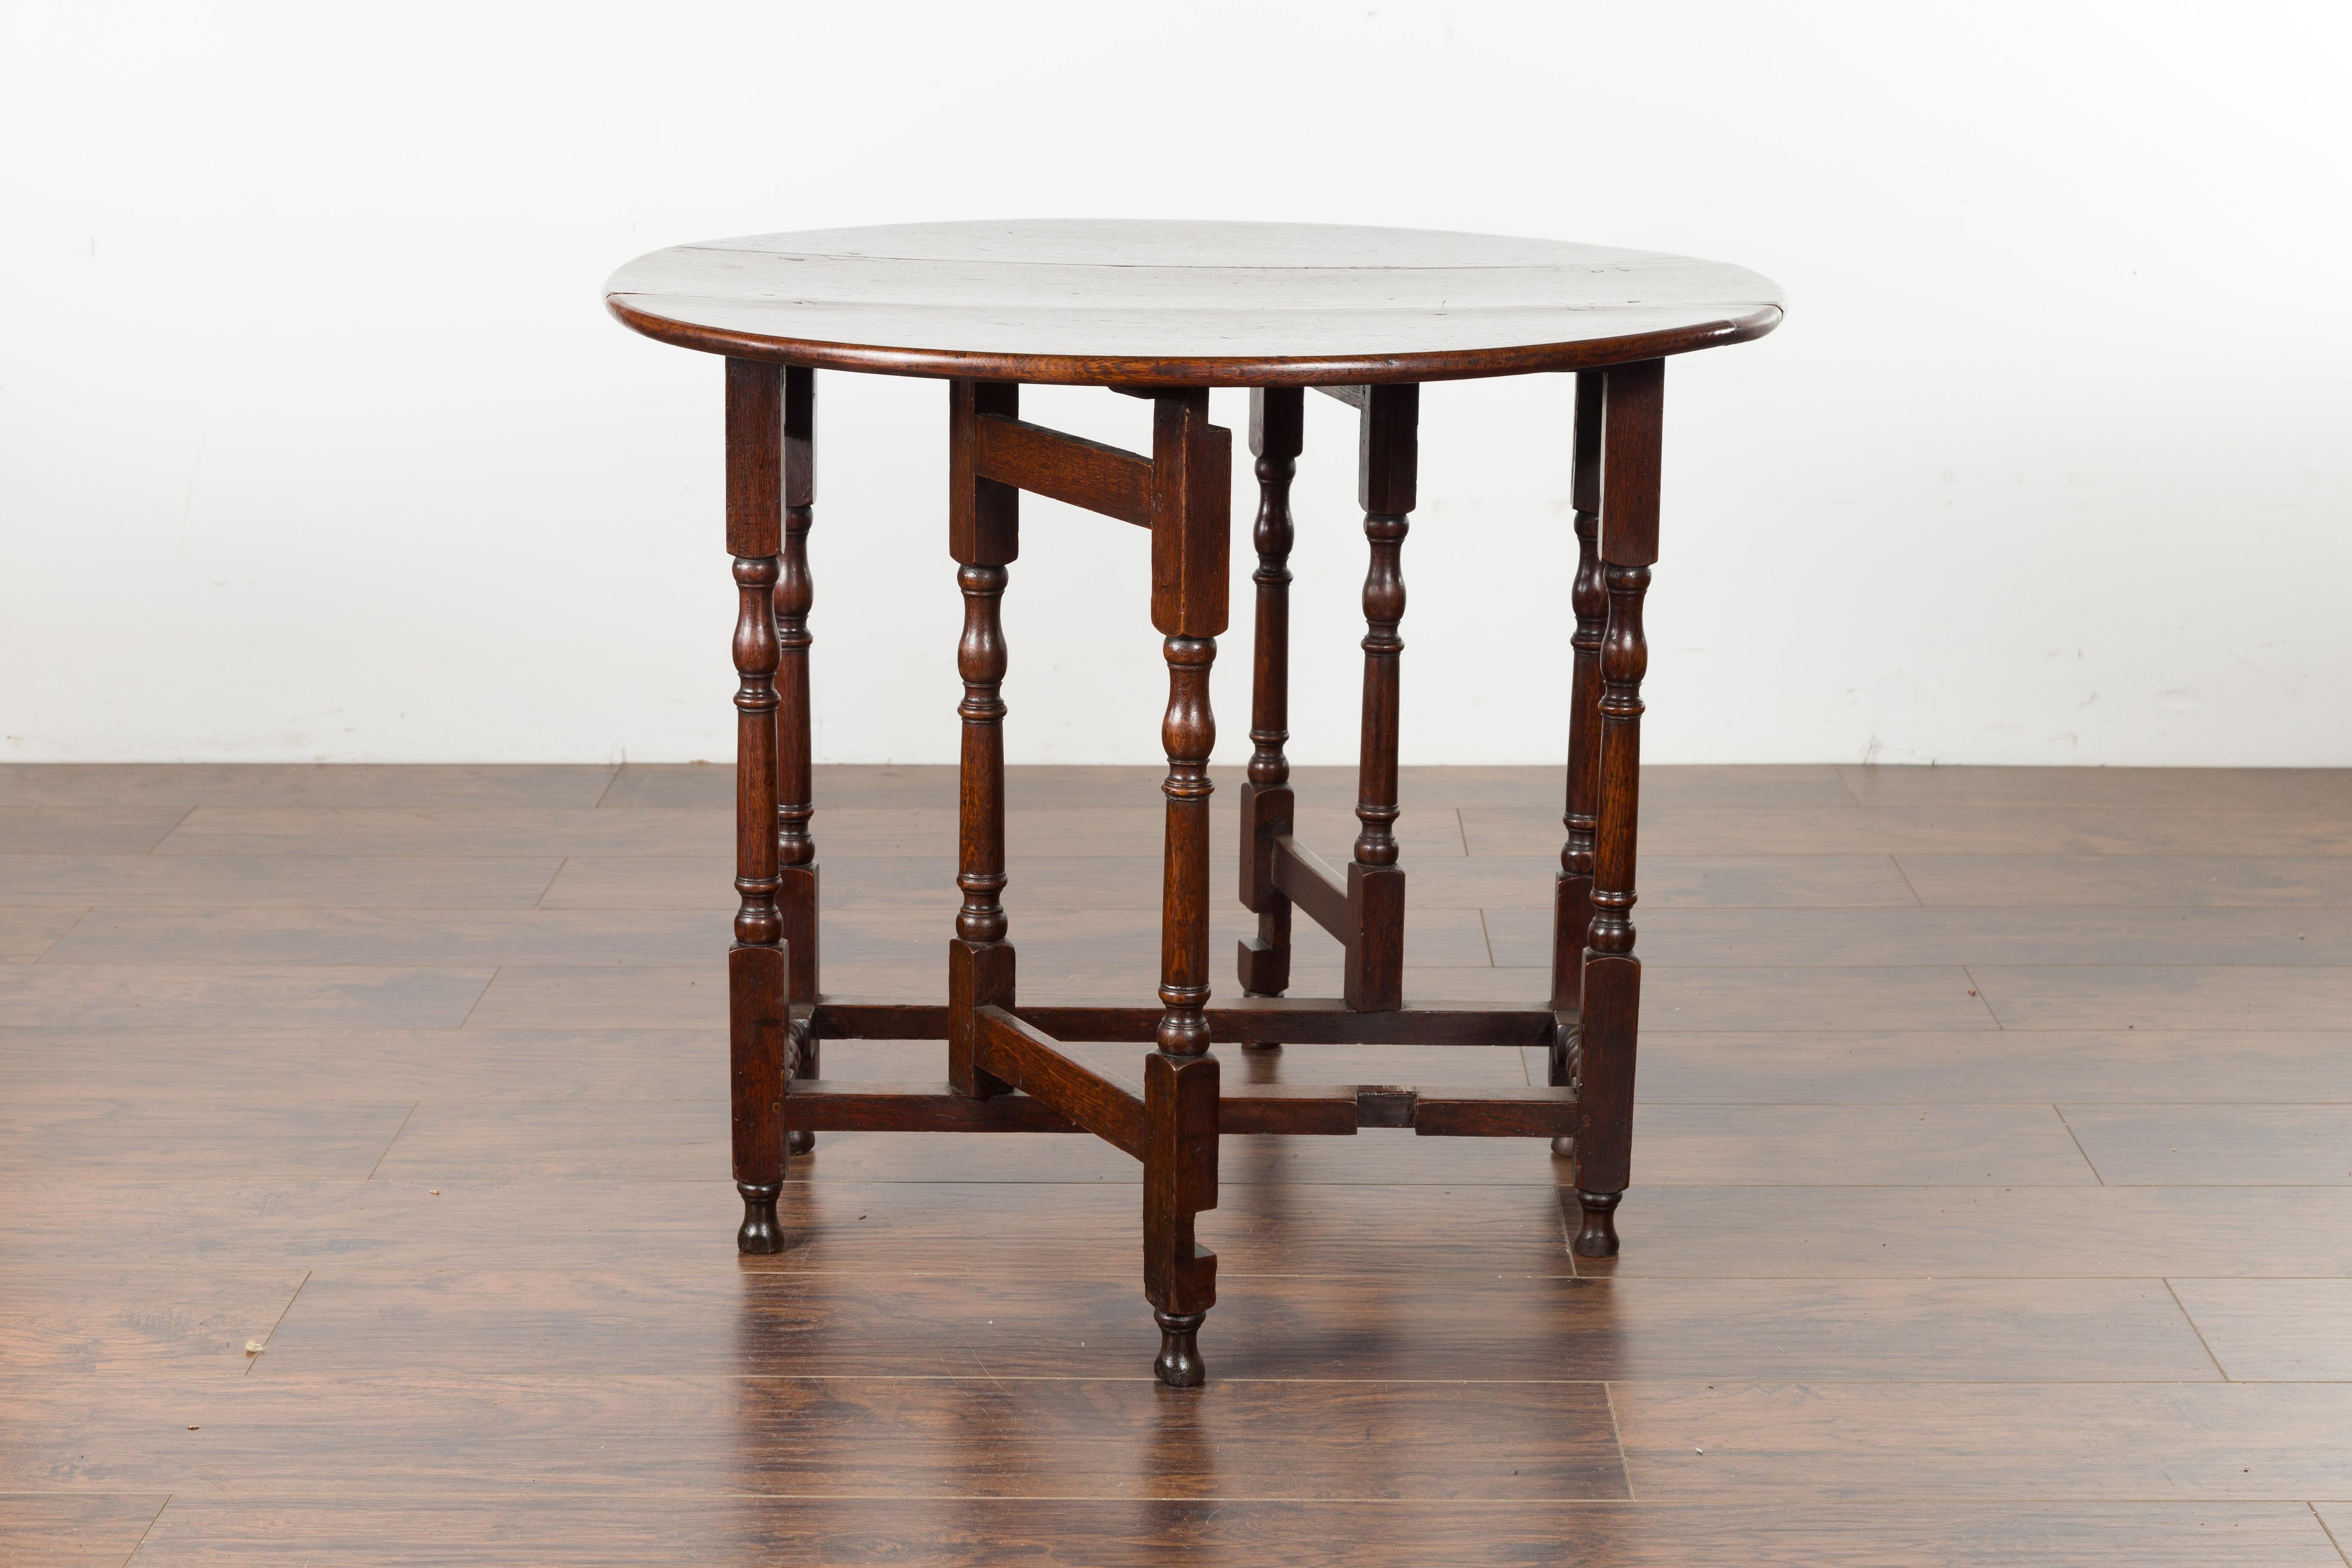 Petite English Oval Oak 19th Century Drop-Leaf Table with Baluster Legs For Sale 9